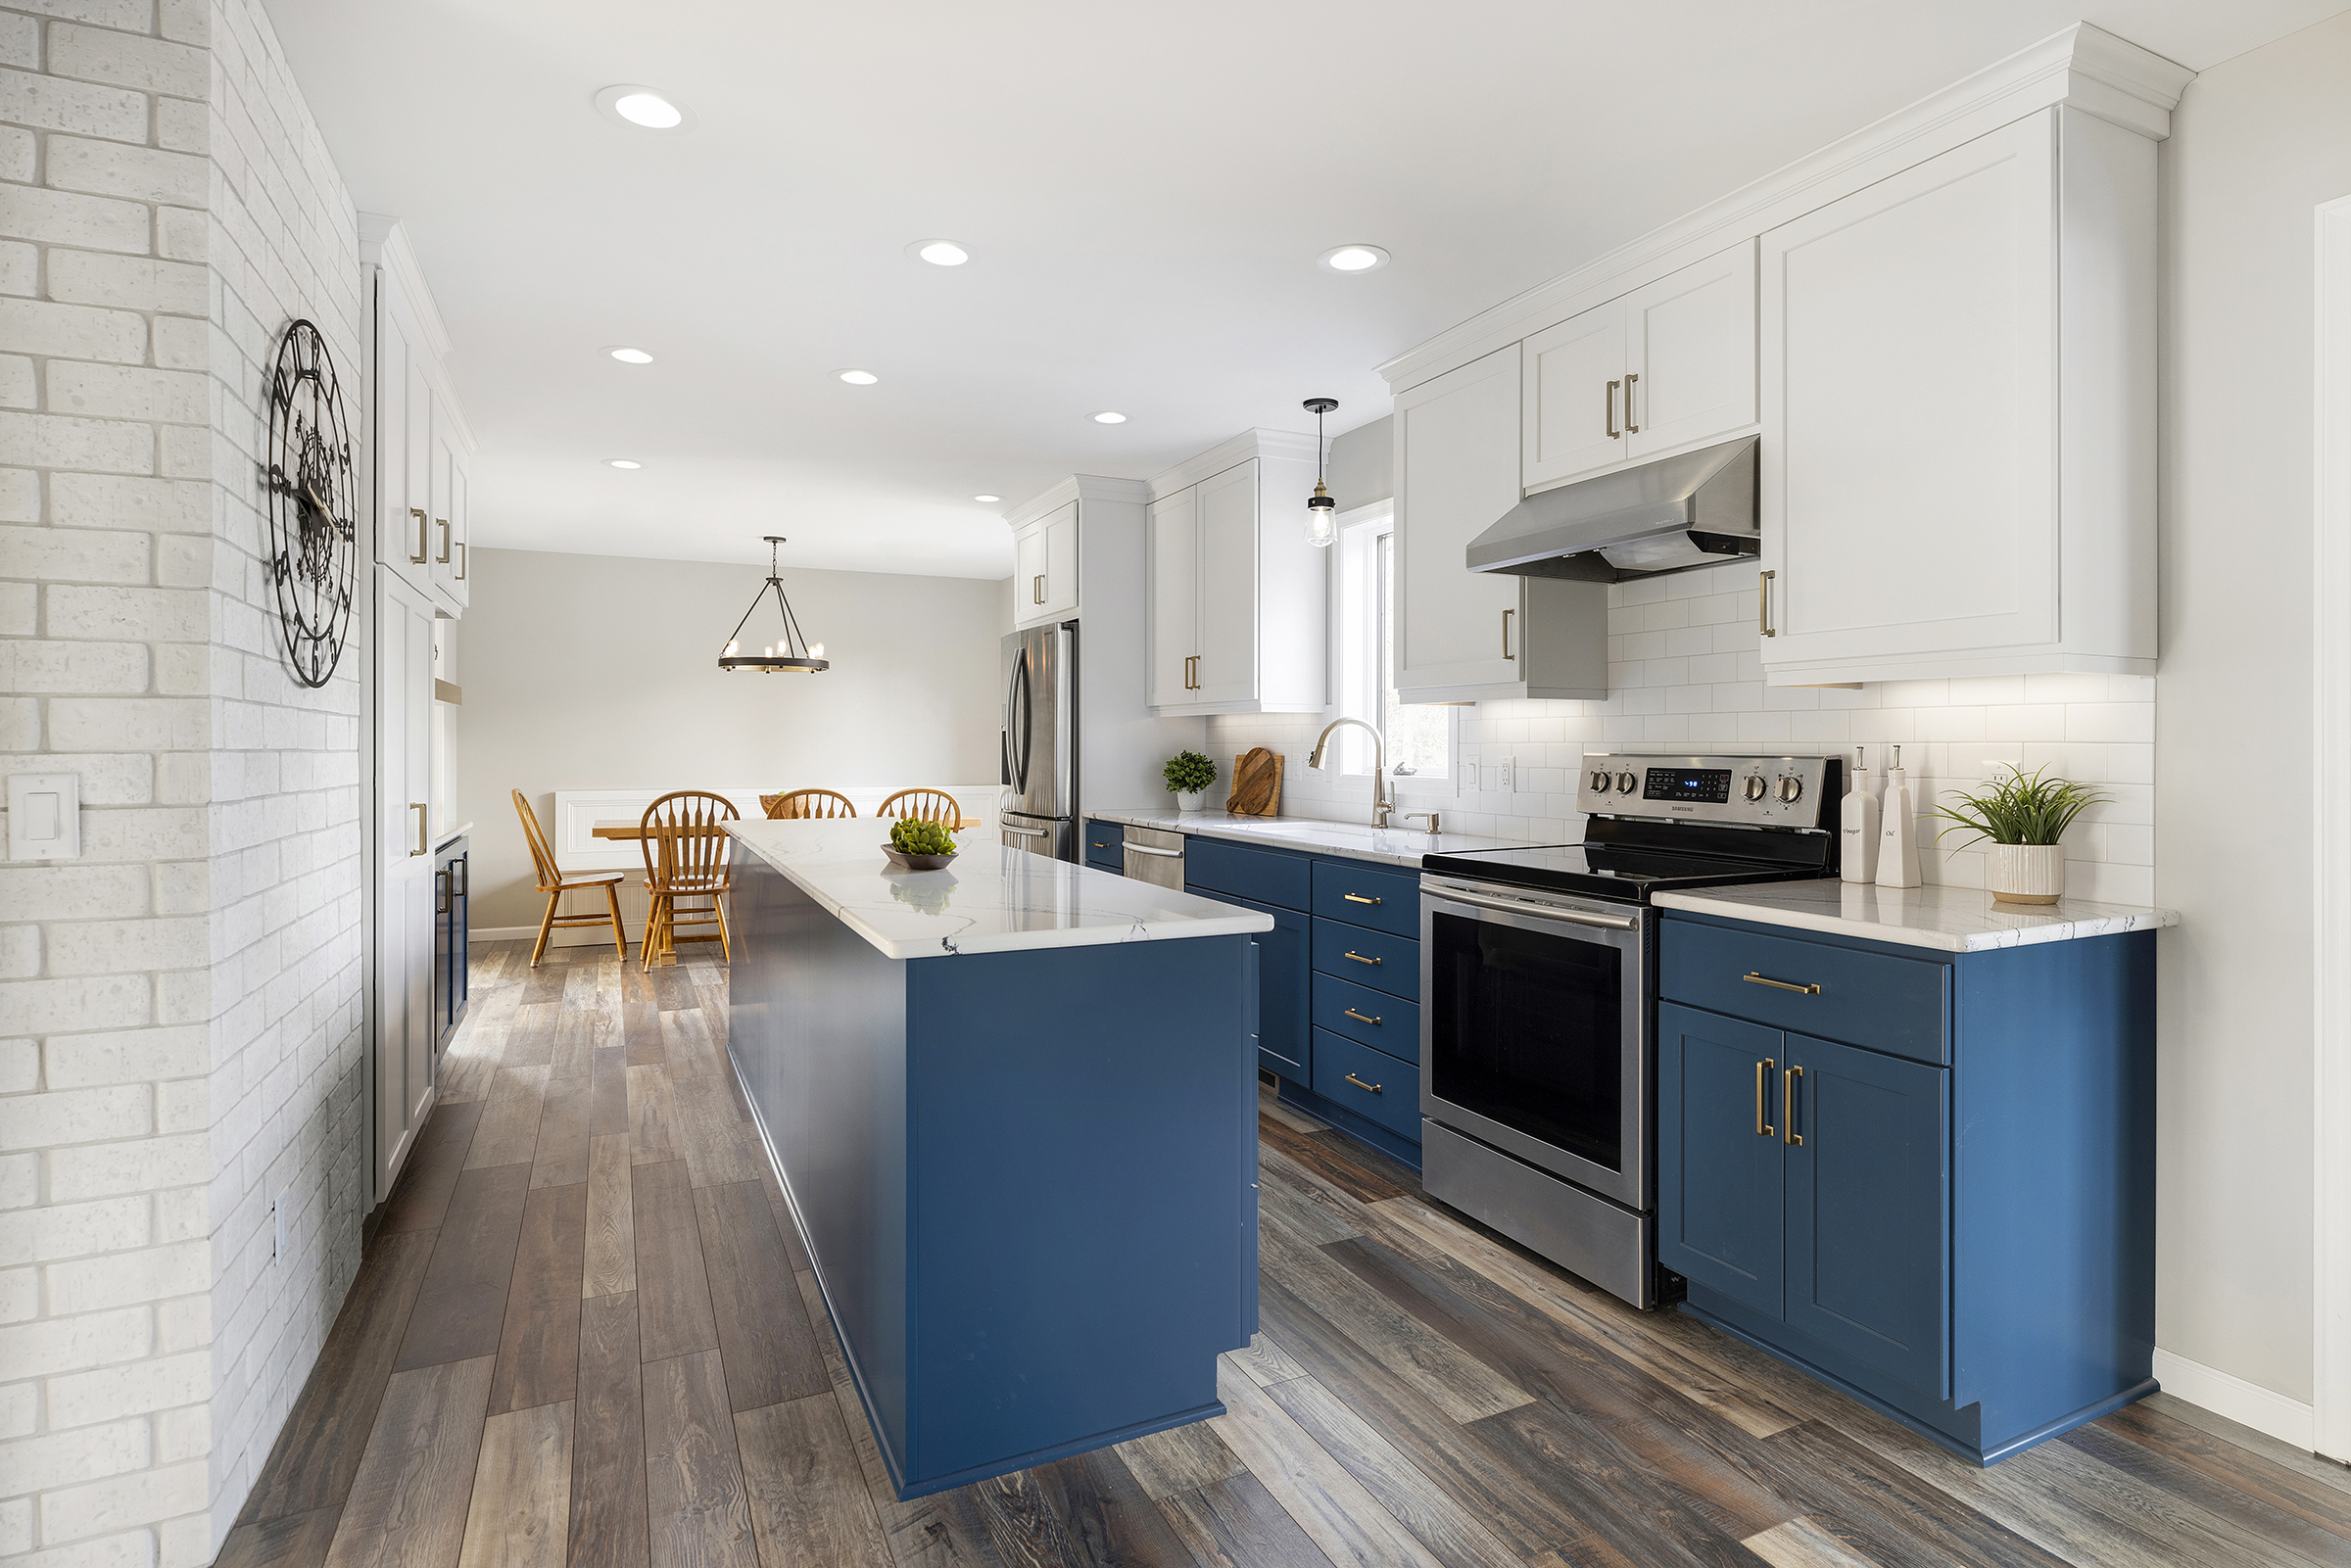 Remodeled kitchen with blue base cabinets, white upper cabinets, brick wall, and eat in dining area